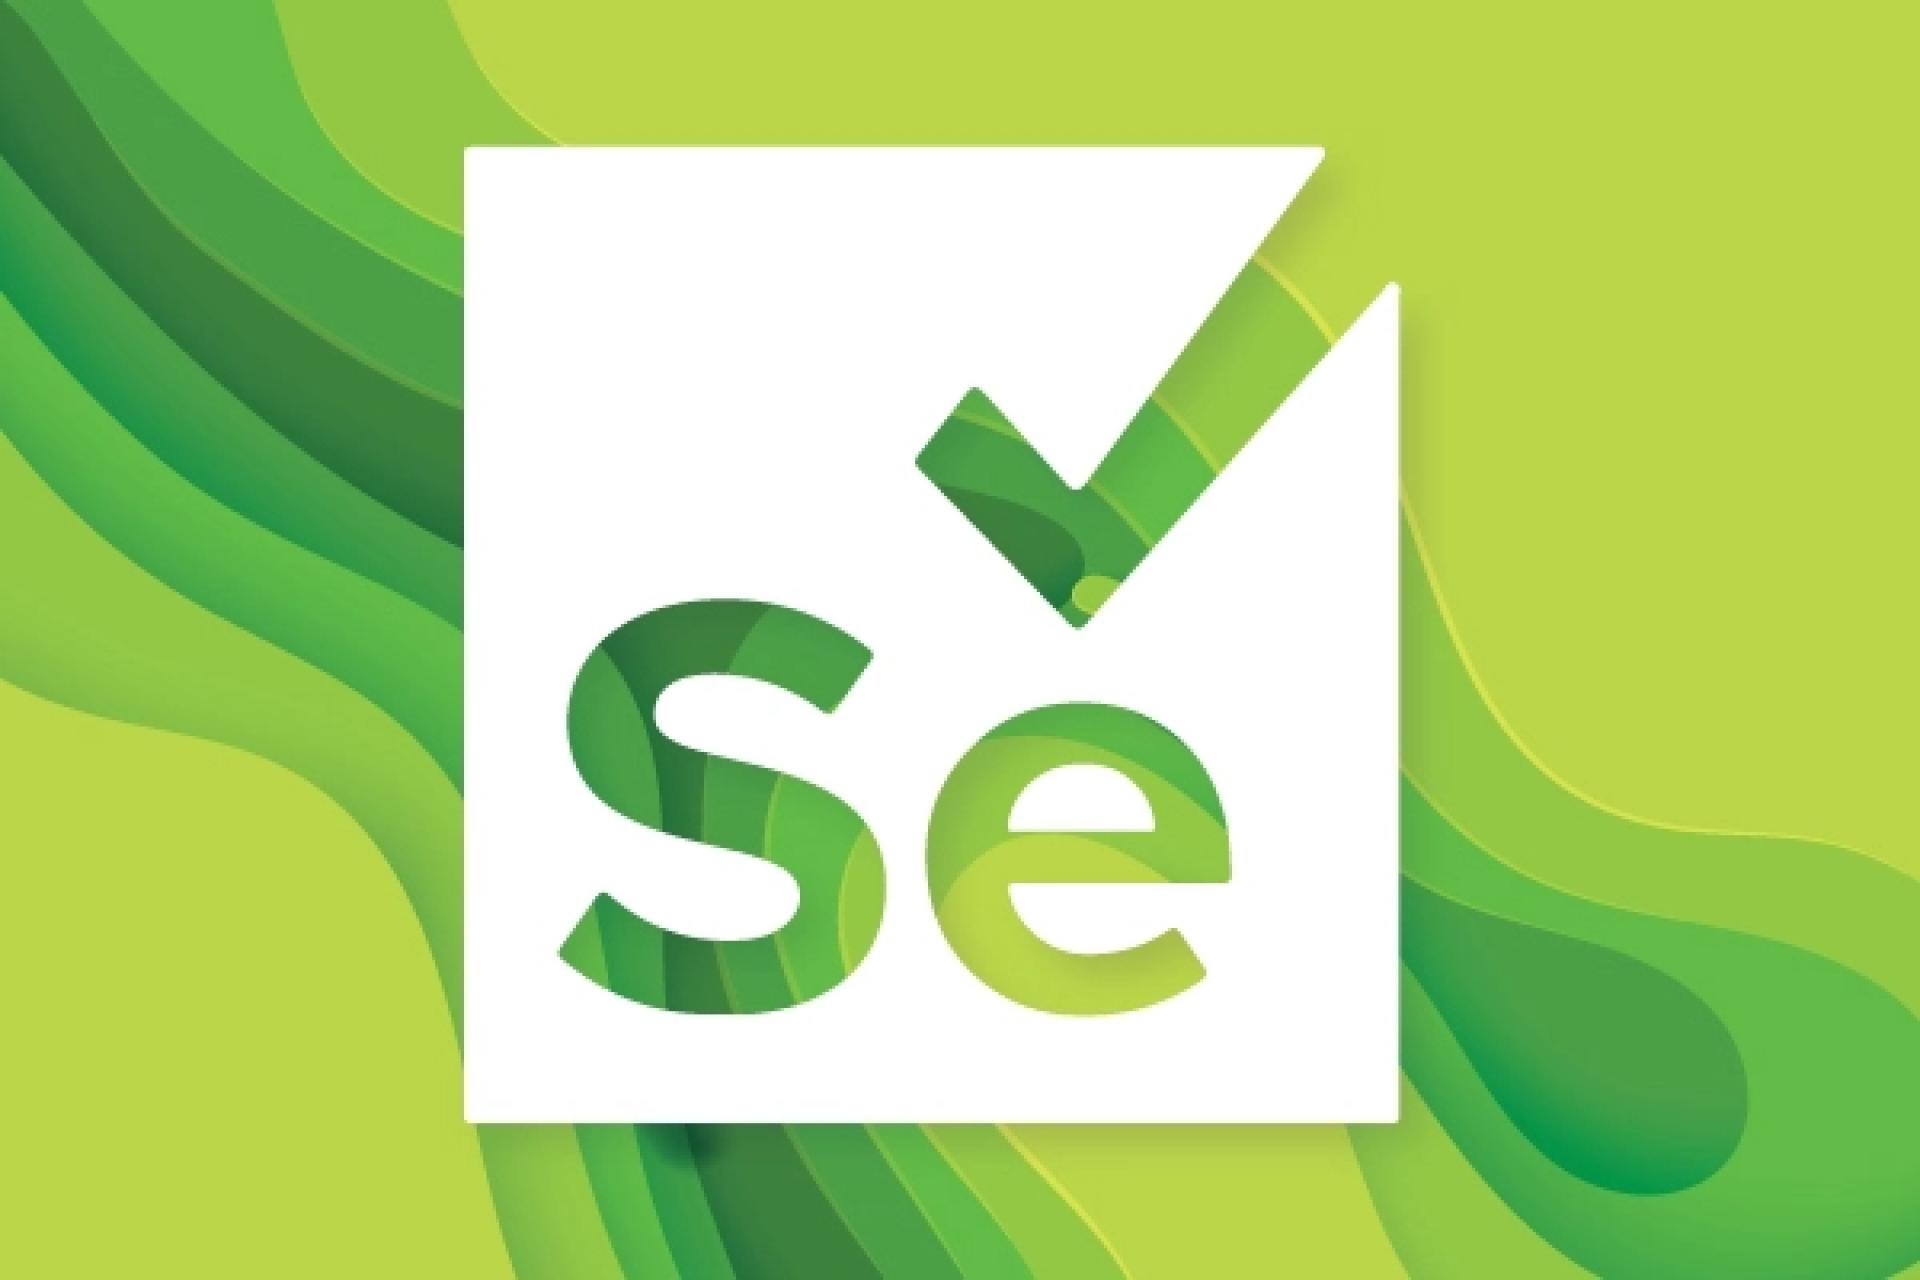 Getting Started with Selenium (Python)